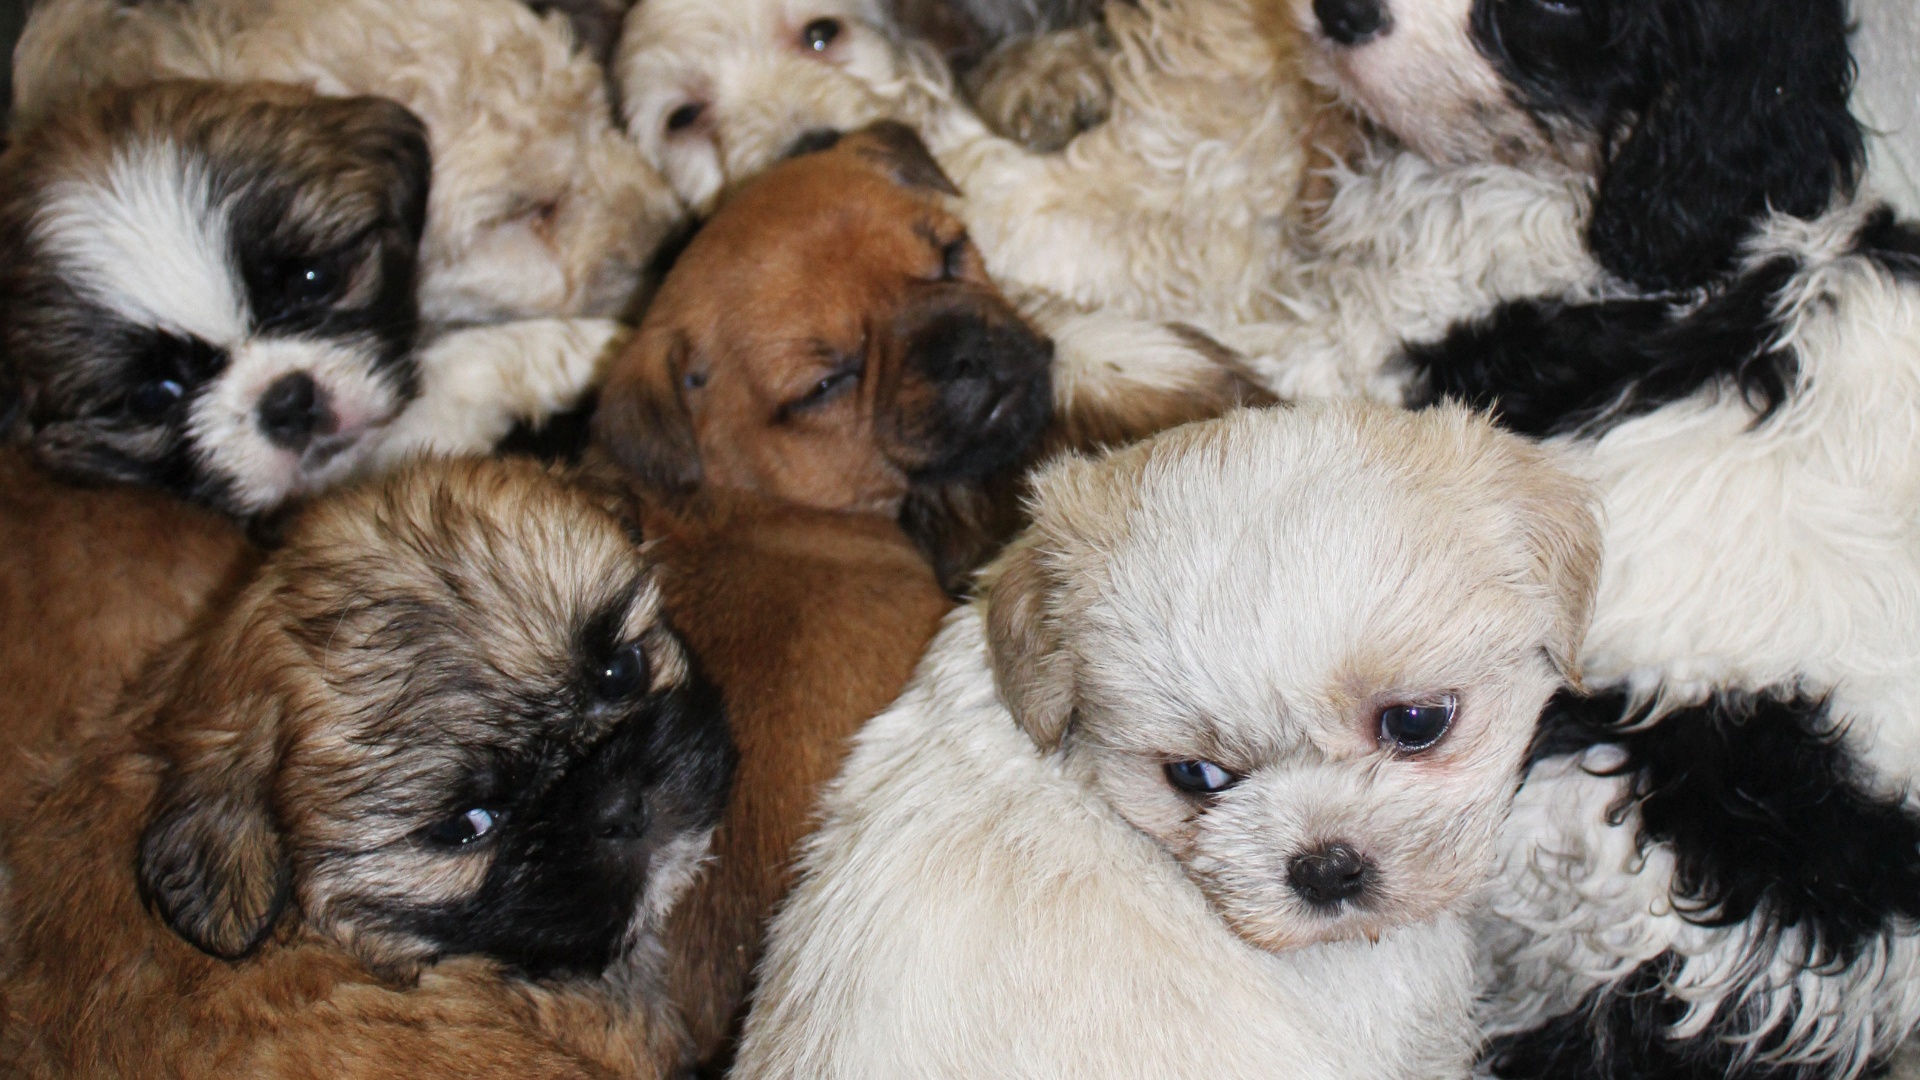 Some puppies can be priced as high as £3,000.